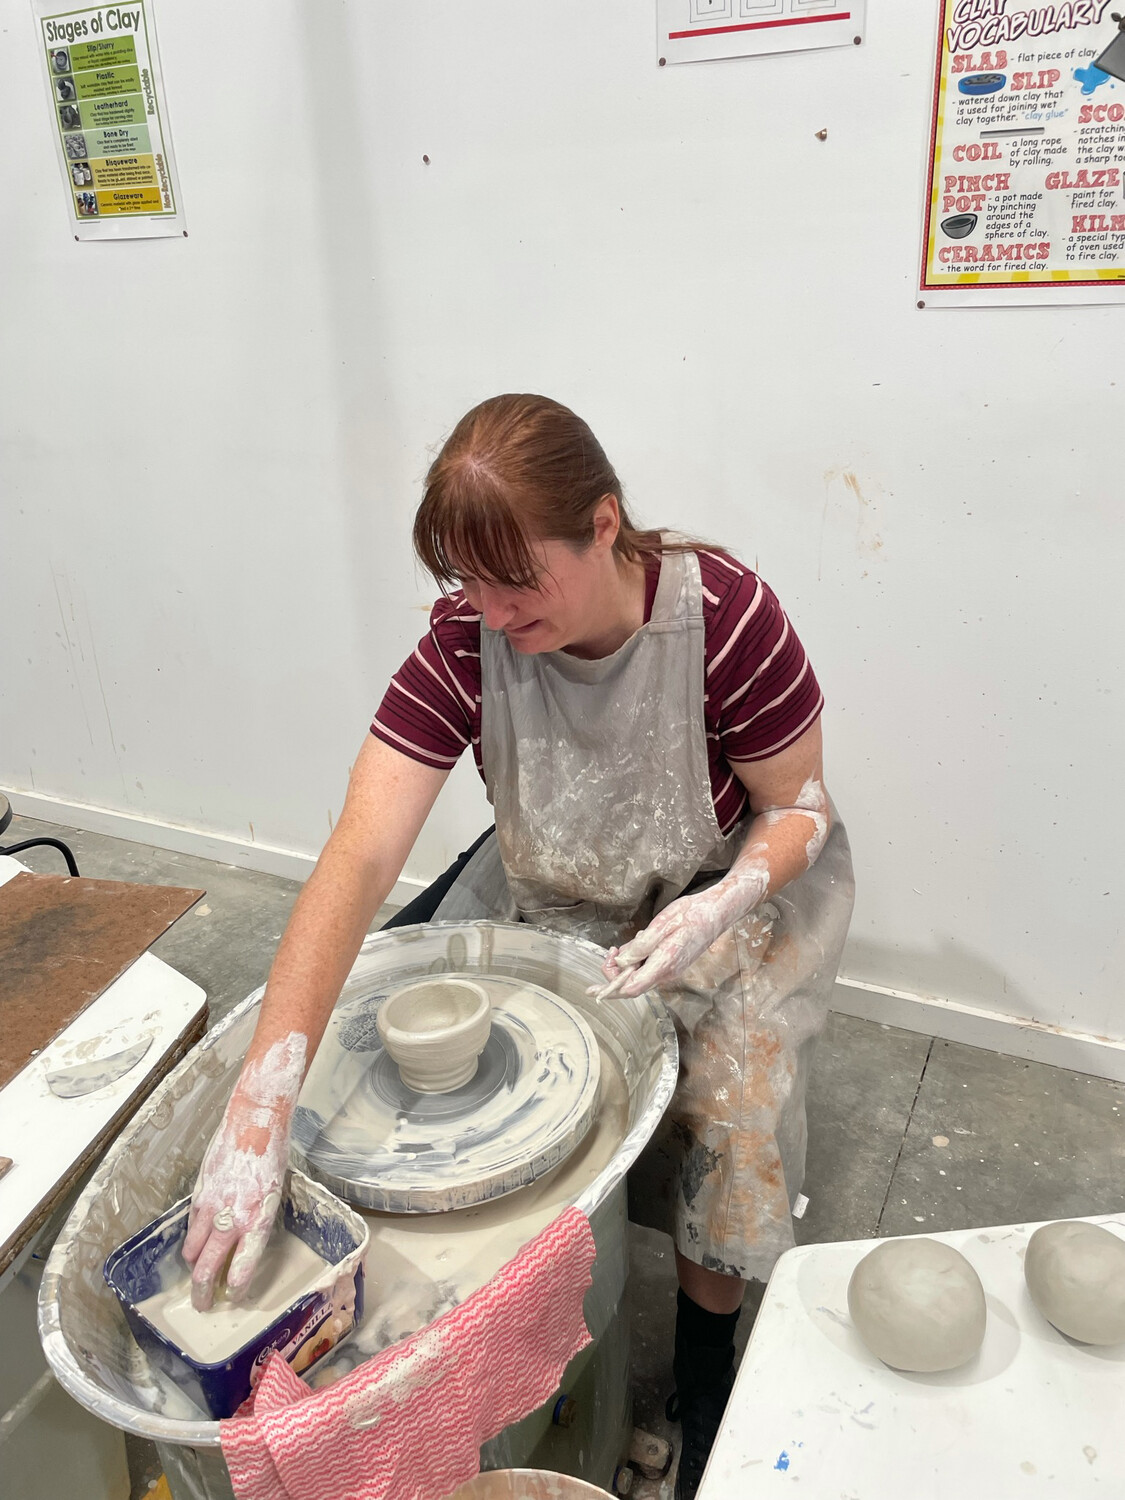 Slip, Spin & Sculpt! 4 week Pottery course Wednesday 8th June 6pm